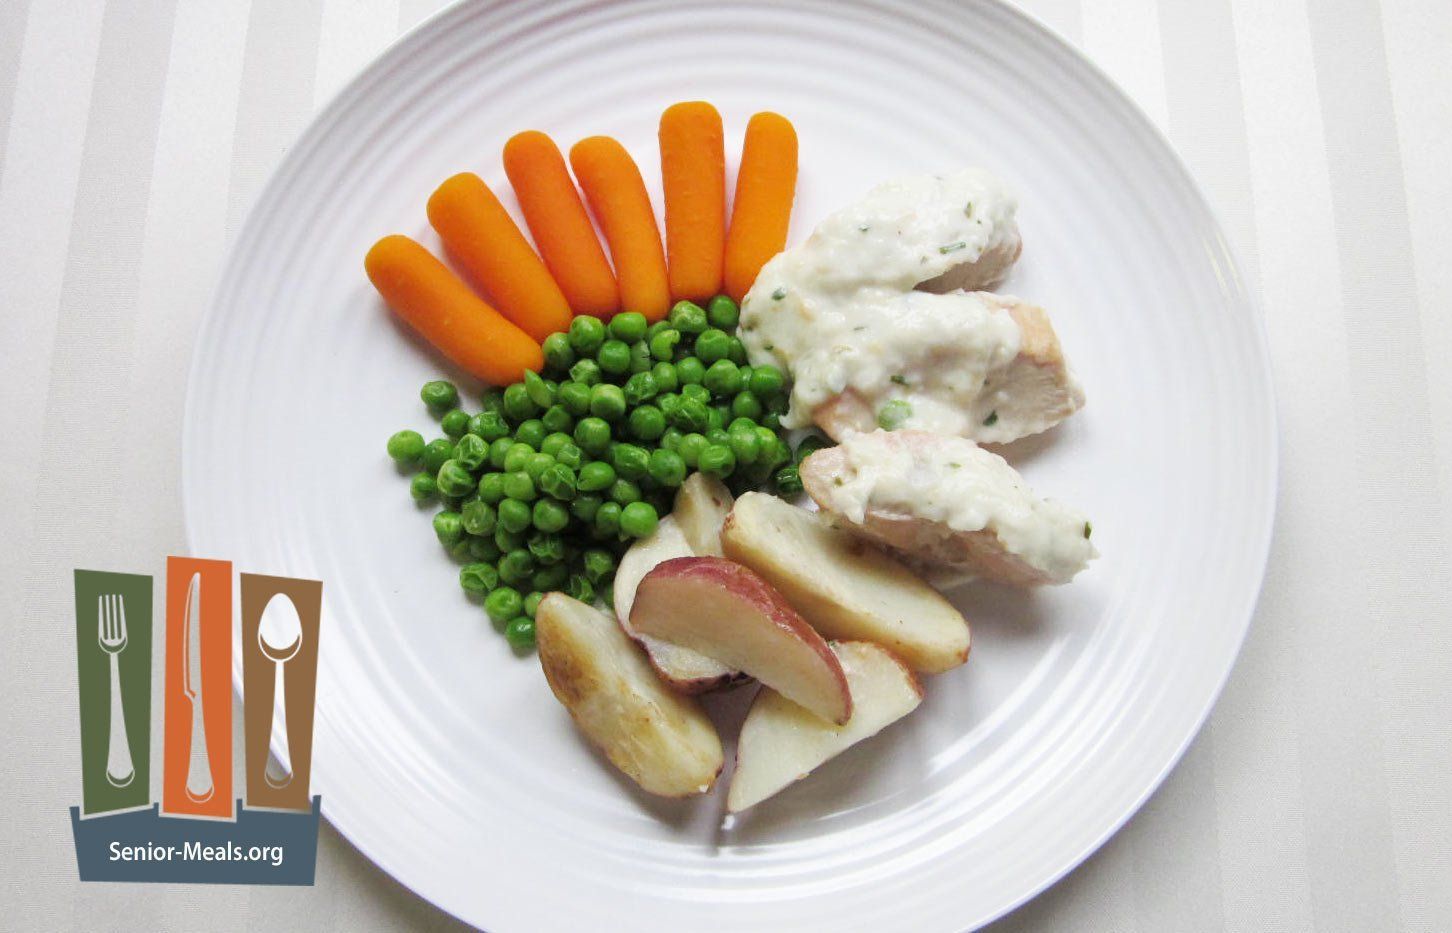 Chicken Breast with Tarragon Cream Sauce, Potatoe Wedges, and Peas and Baby Carrots